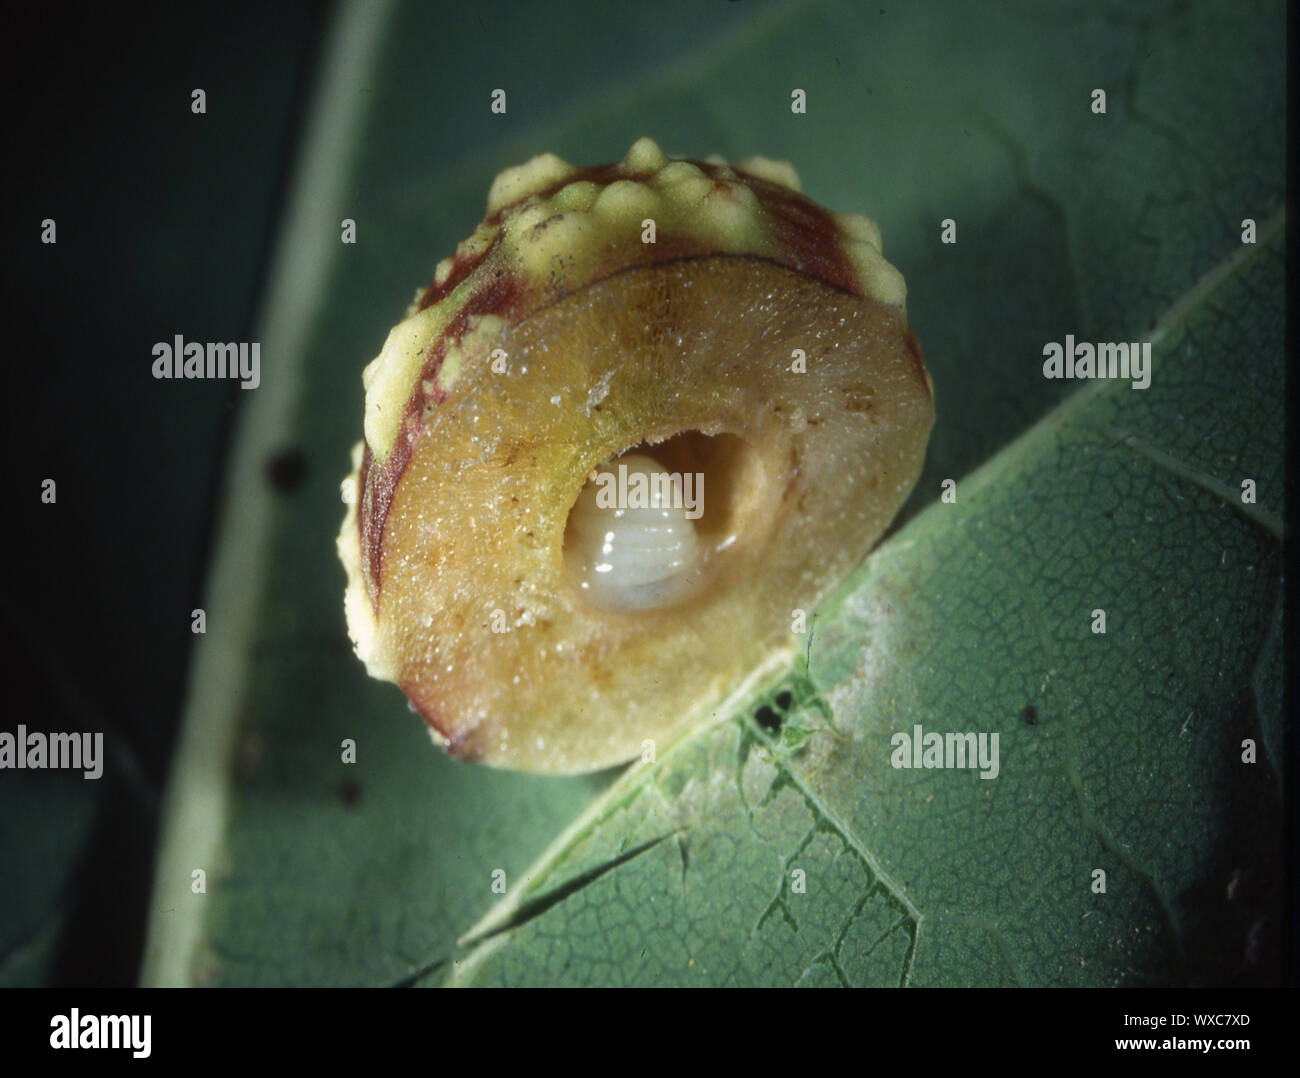 Oak apple with insect larvae Stock Photo